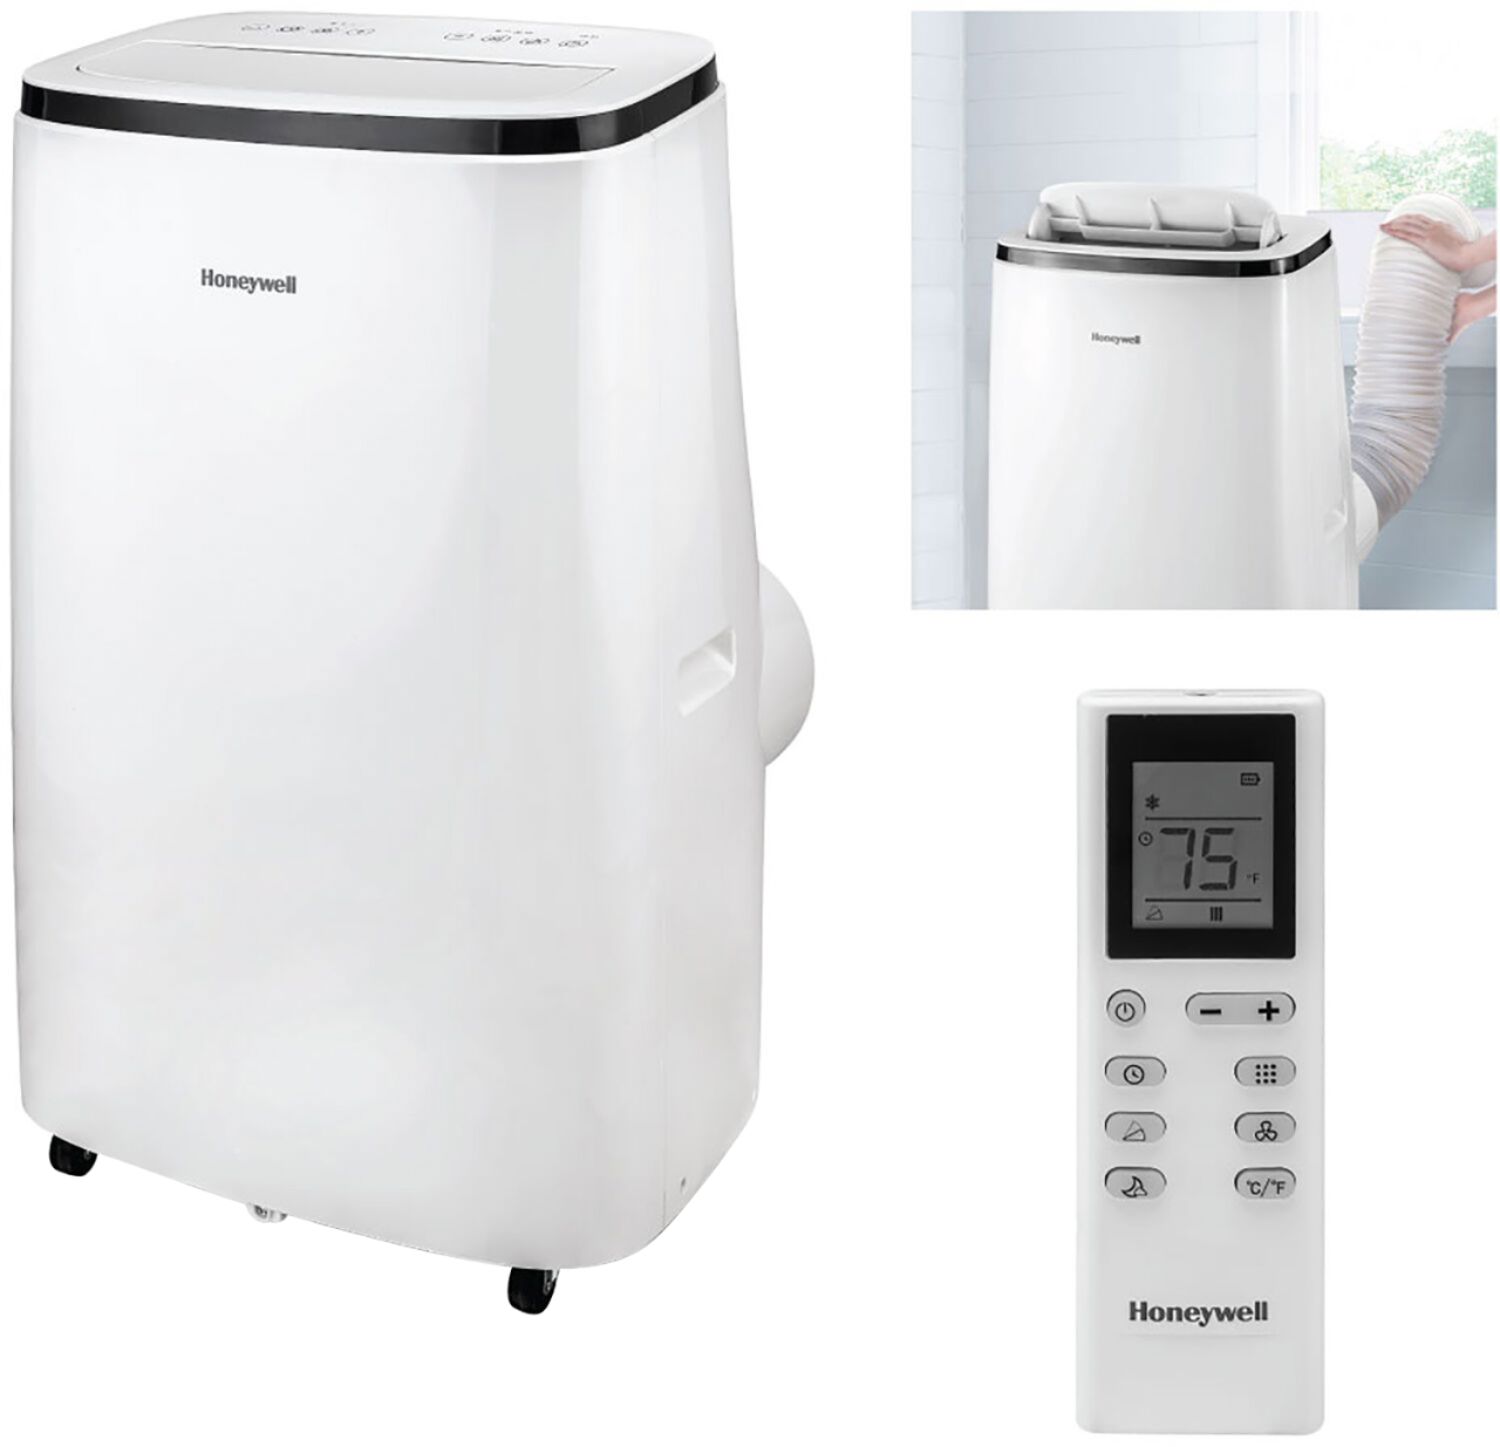 Angle View: Honeywell - 450 Sq. Ft. 10,000 BTU Portable Air Conditioner with Dehumidifier & Fan - White